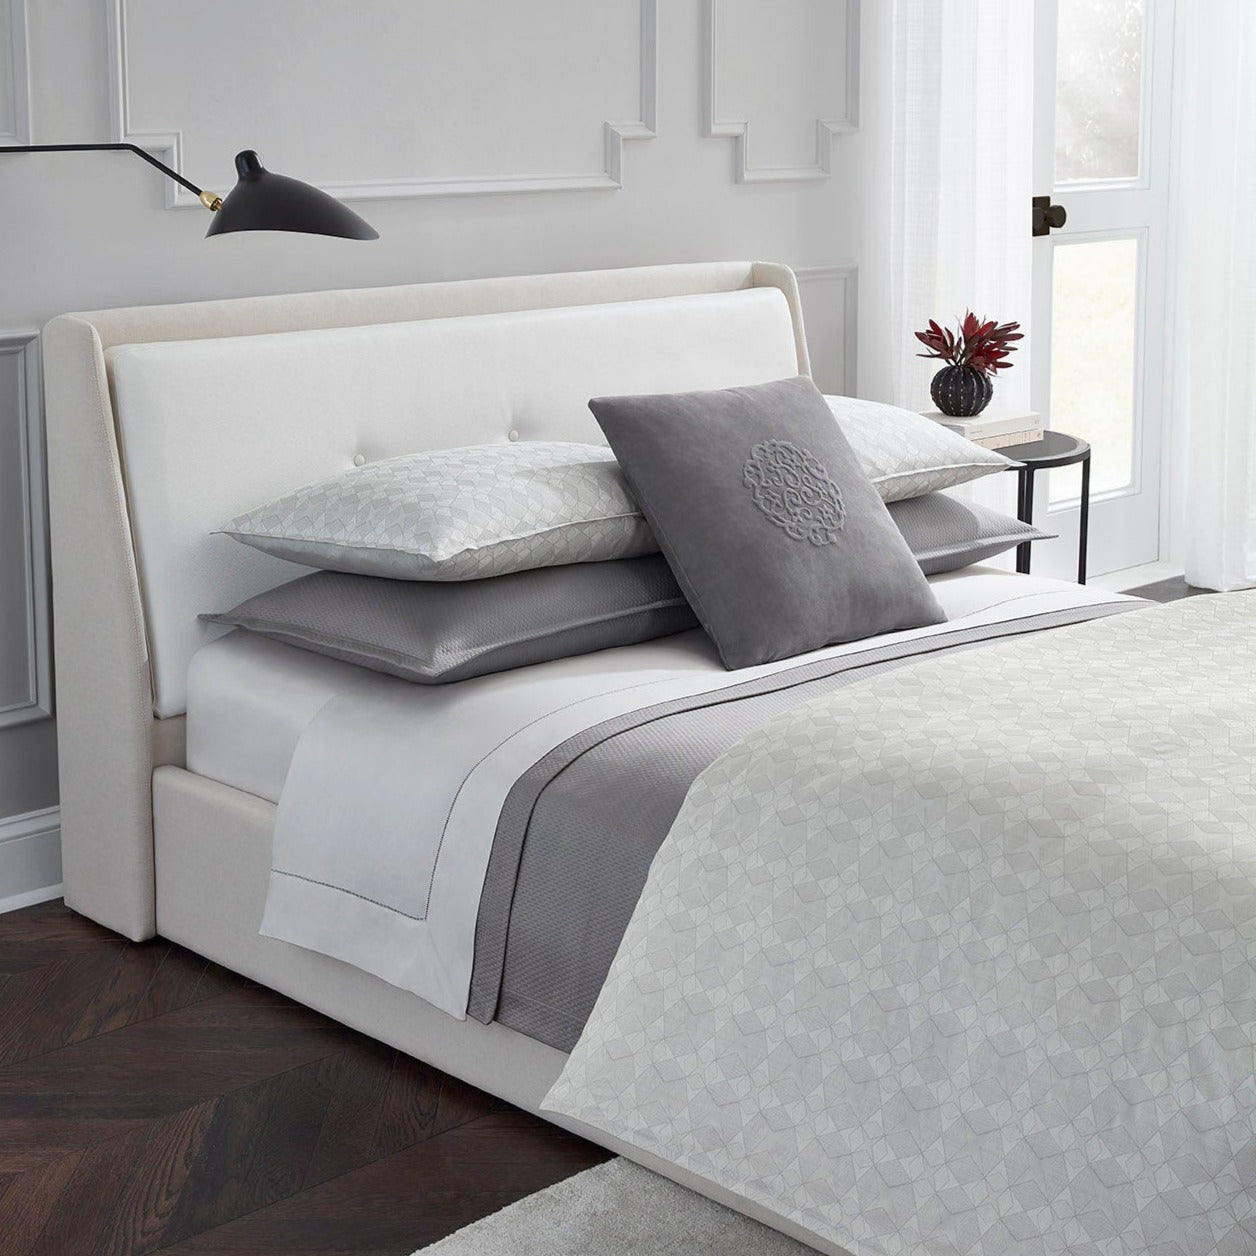 Ferentino Bed Linens